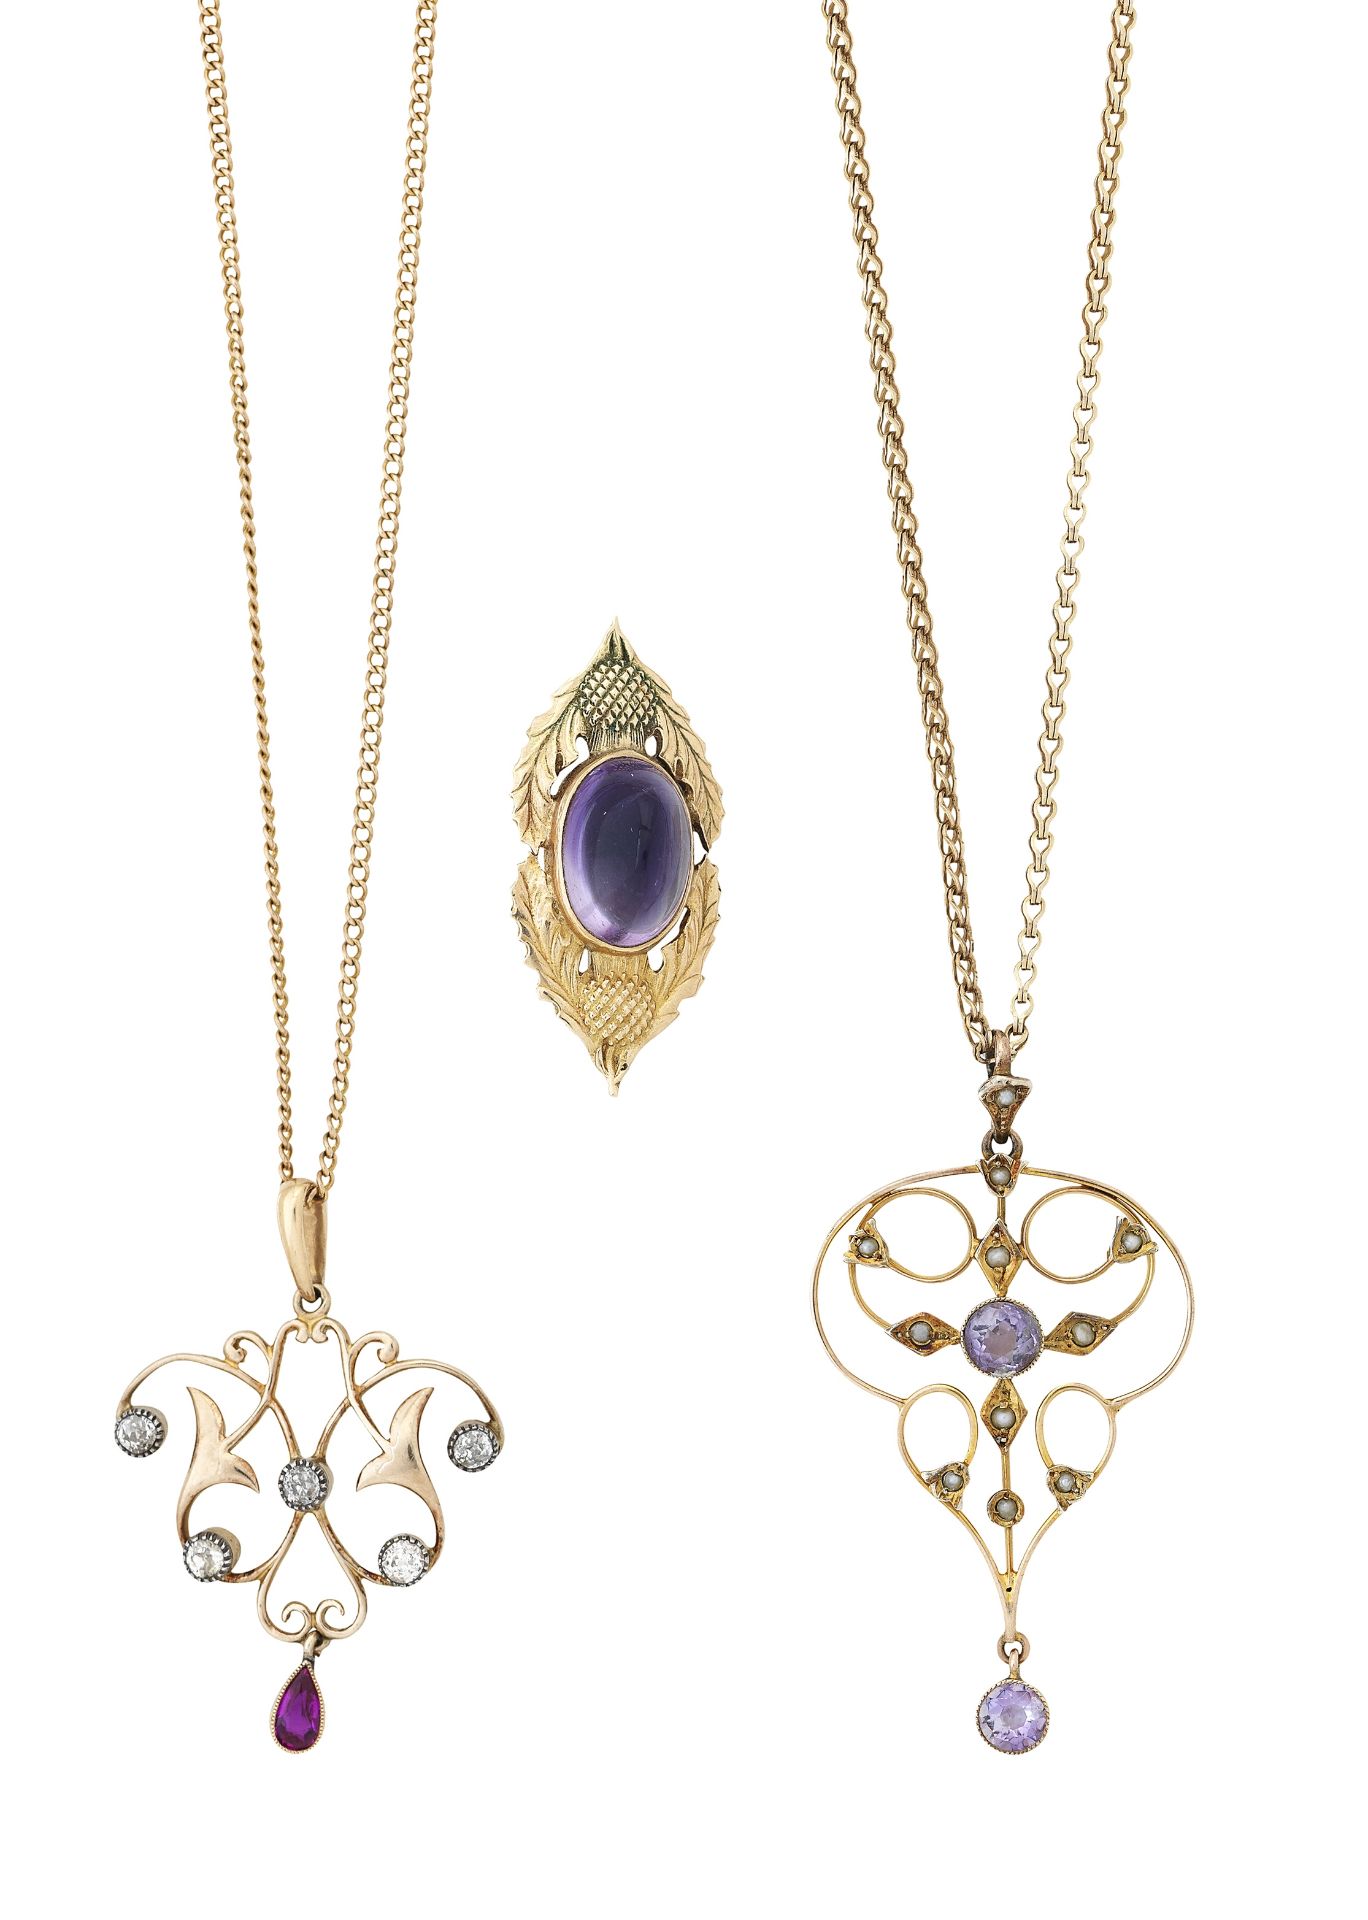 An amethyst brooch and two gem-set pendants with chains